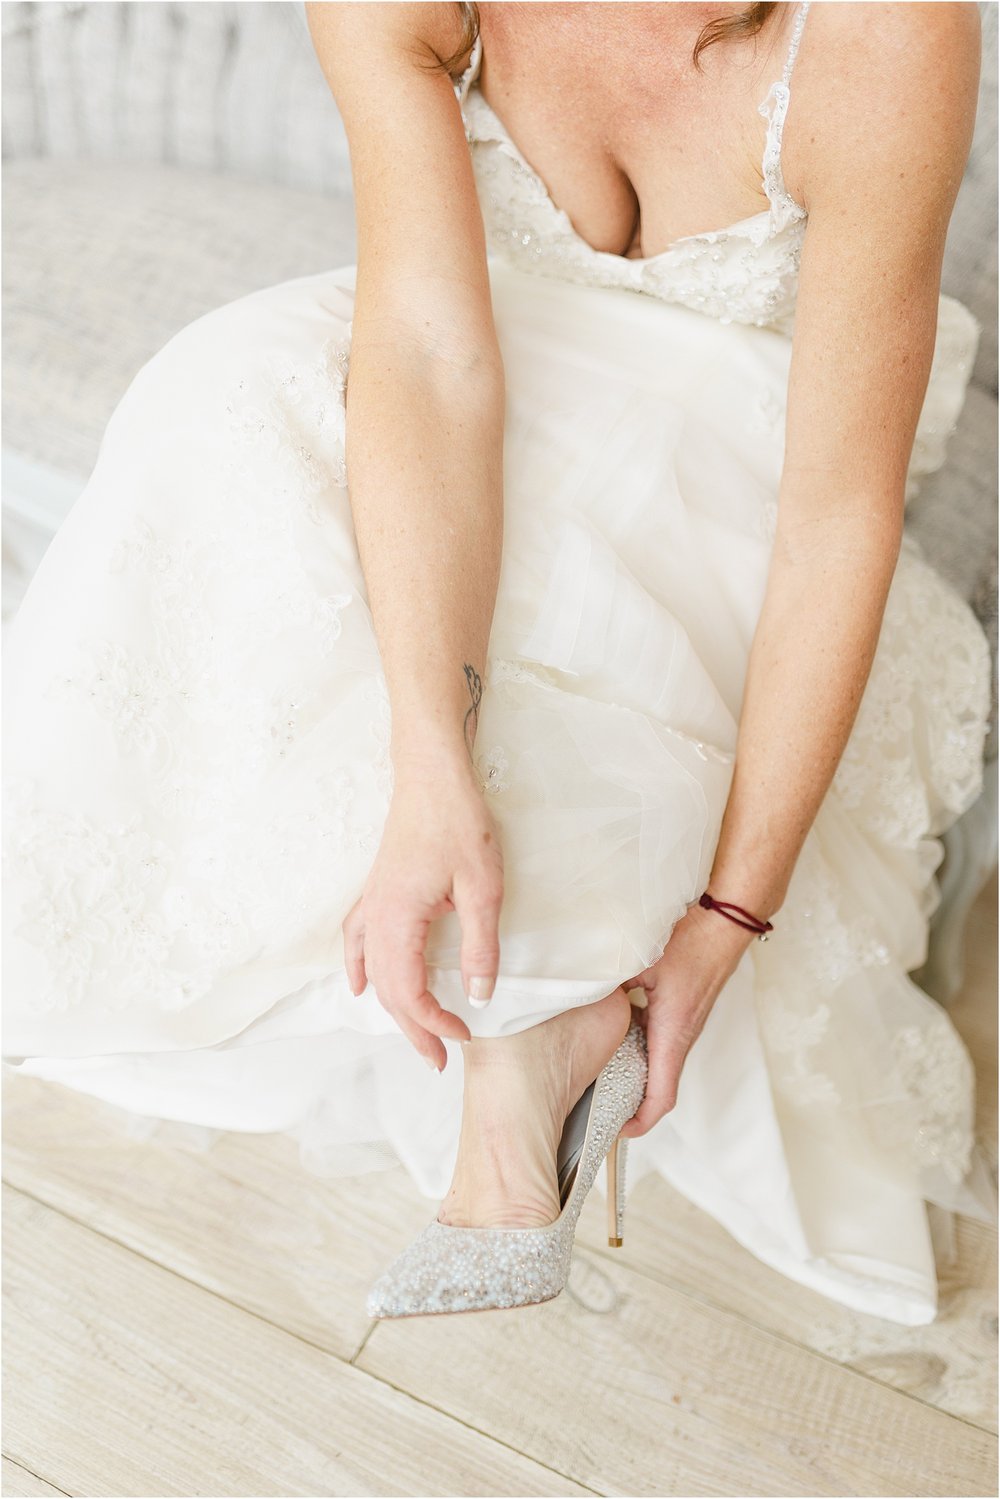 Bride Putting on Her Shoes